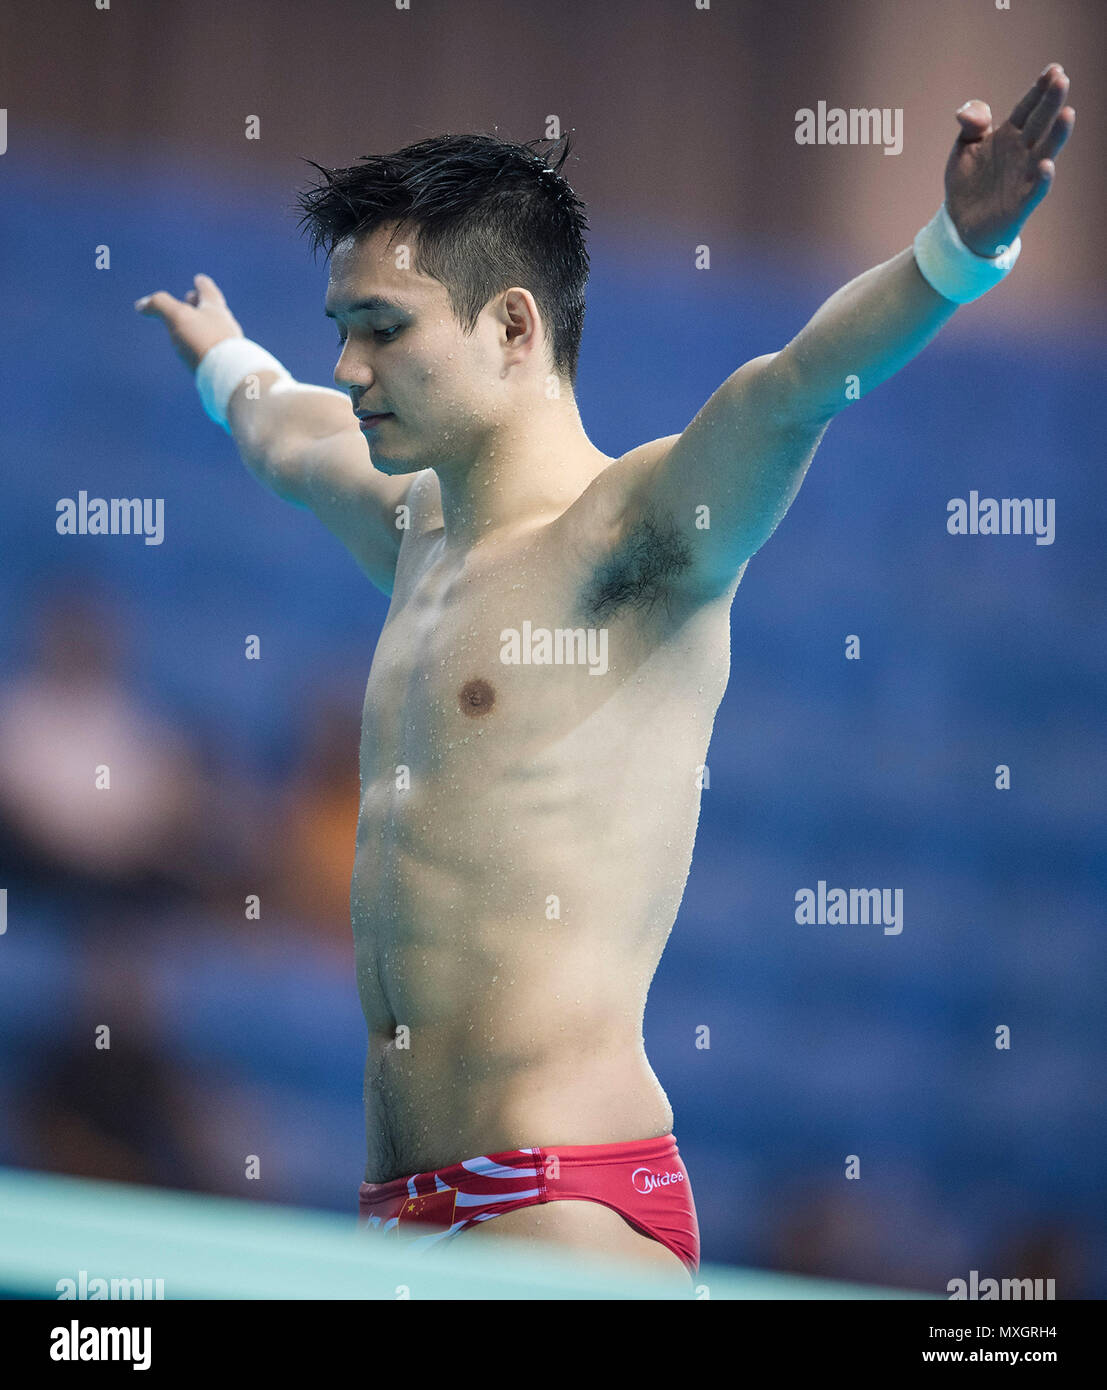 Wuhan, China's Hubei Province. 4th June, 2018. China's Qiu Bo competes during the men's 3m springboard competition of Mixed 3m&10m Team Final at the FINA Diving World Cup 2018 in Wuhan, central China's Hubei Province, on June 4, 2018. Team China claimed the title with a total of 406.20 points. Credit: Xiao Yijiu/Xinhua/Alamy Live News Stock Photo